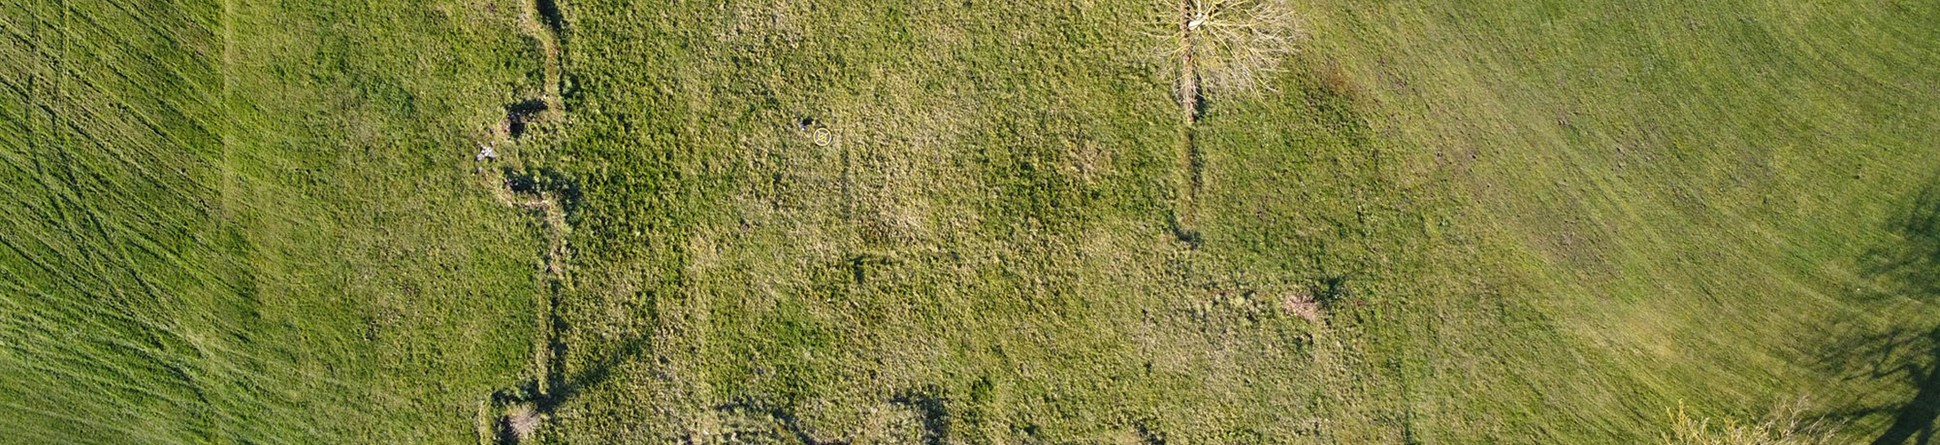 A vertical image shows the outline of Belhus Hall, formerly on the site of Belhus Park golf course